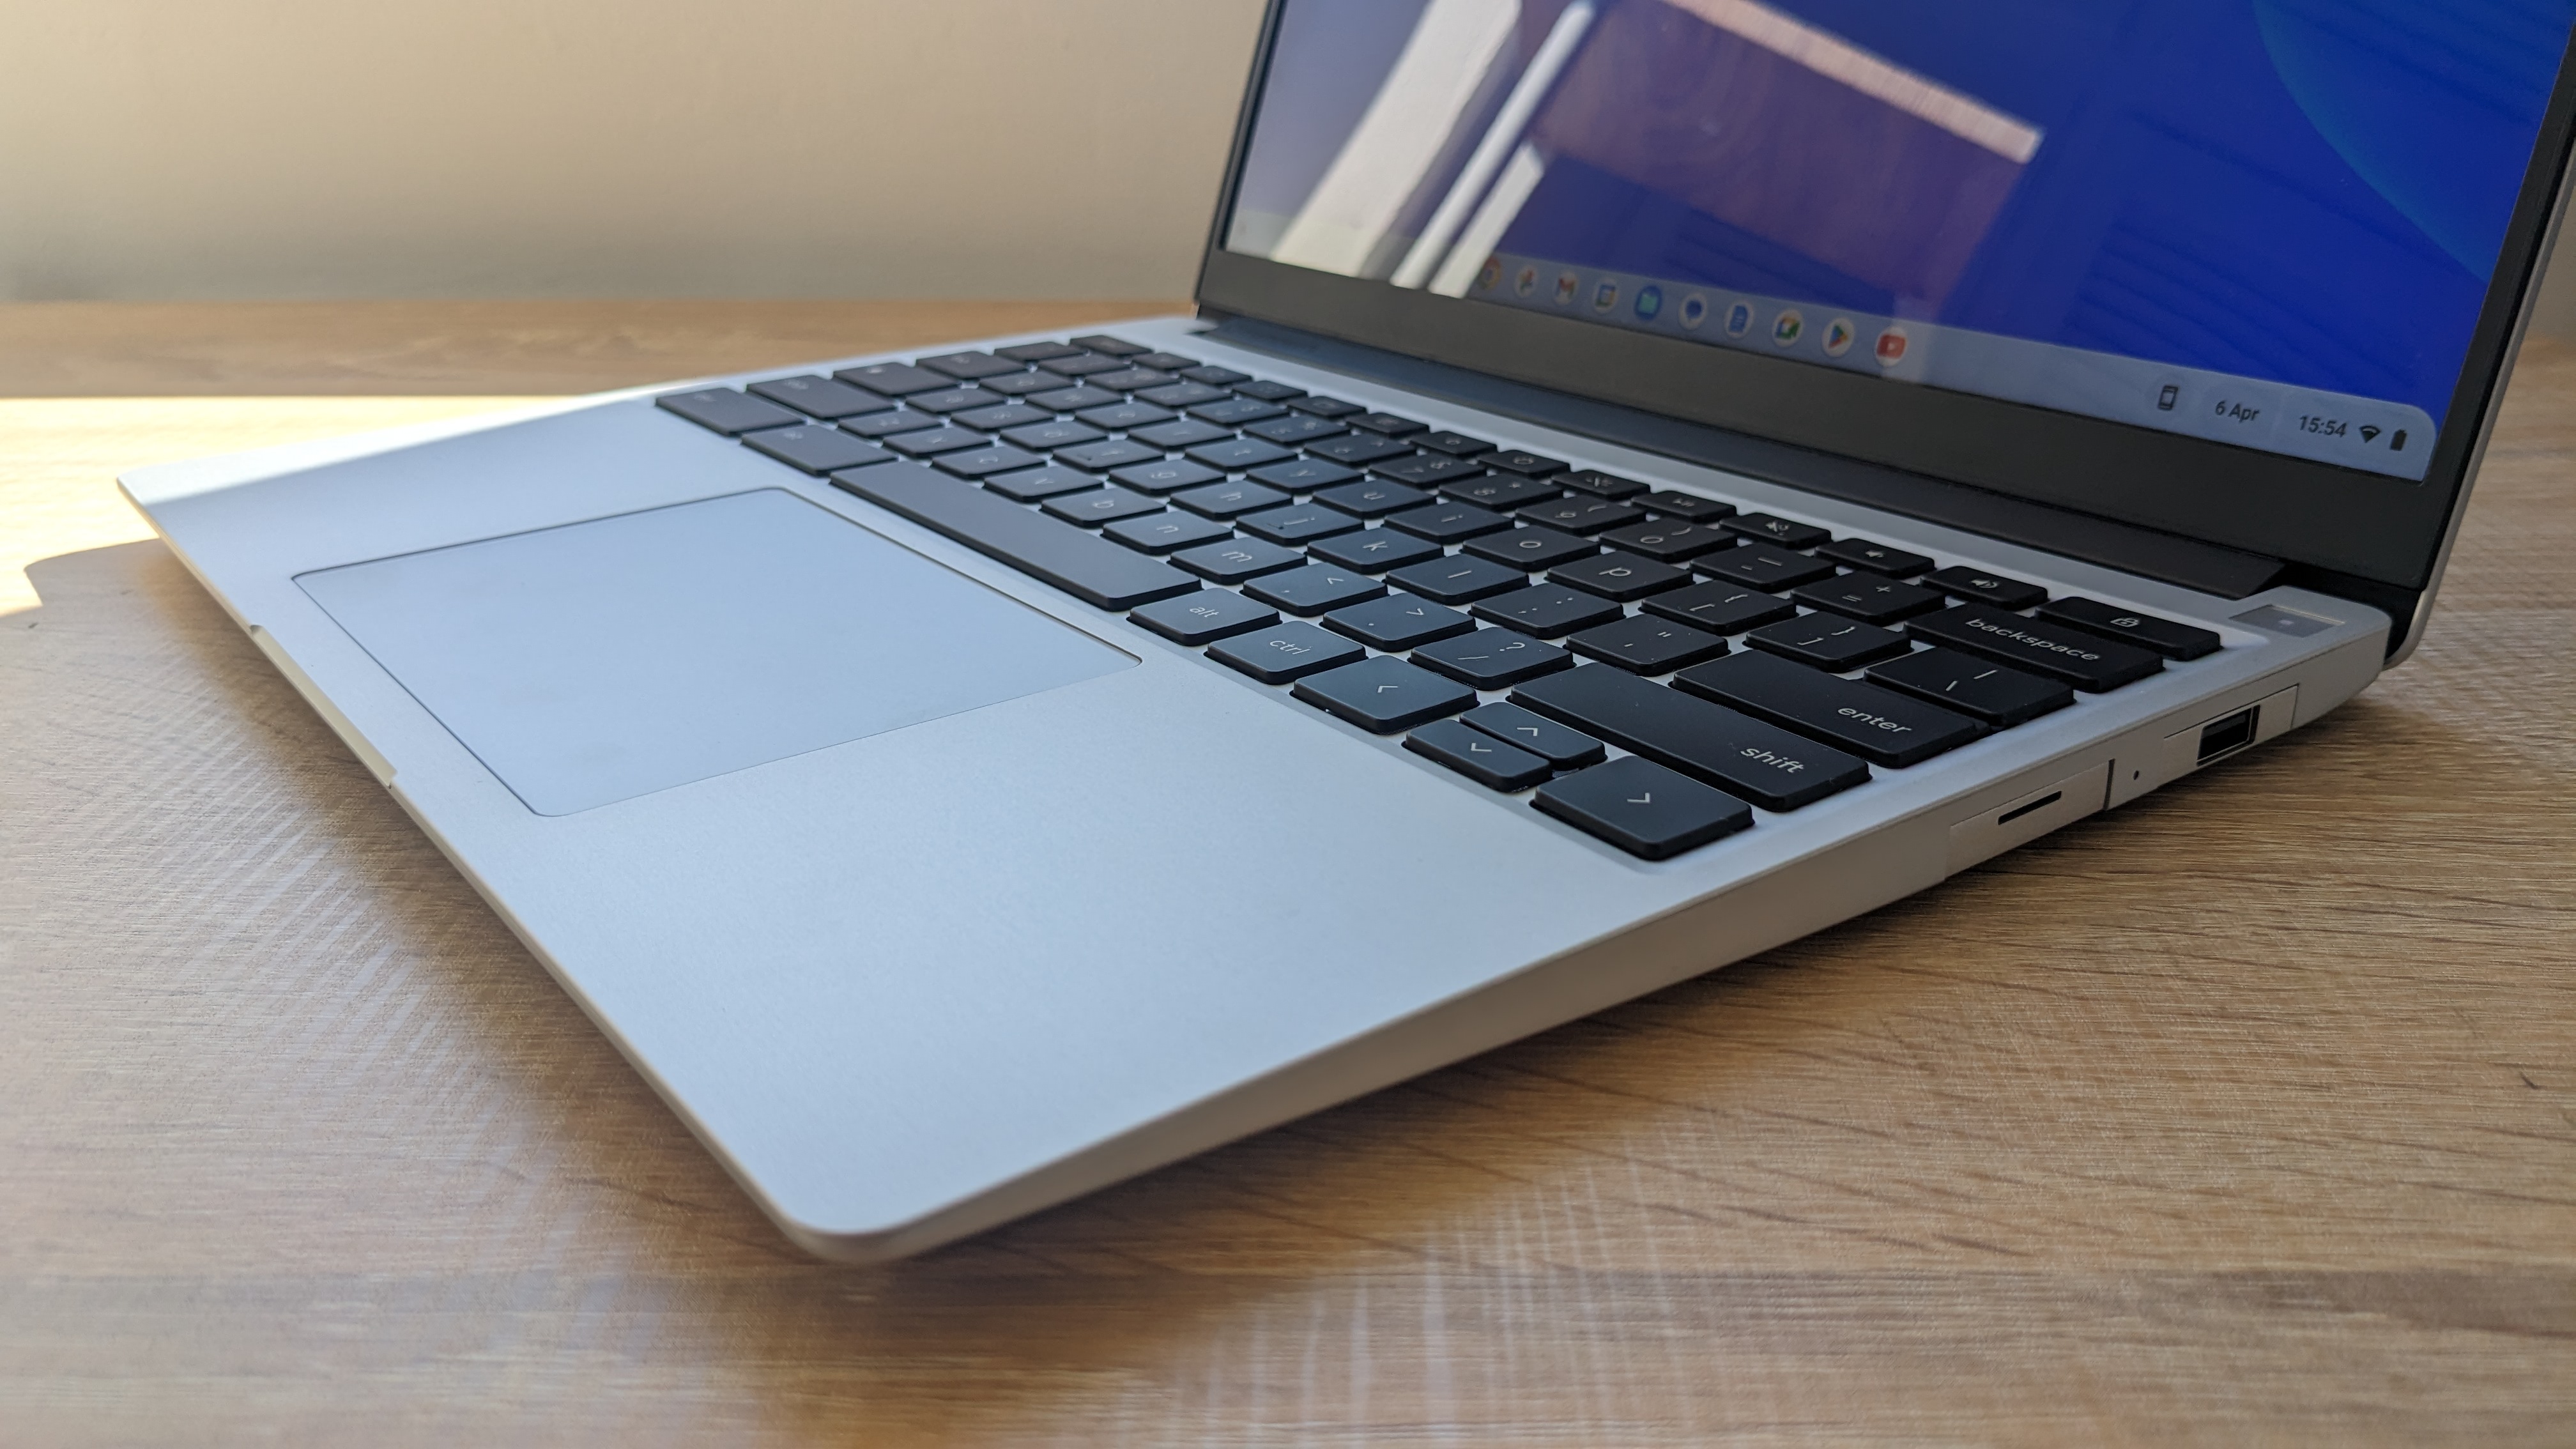 The Framework Laptop Chromebook Edition photographed on a wooden desk.